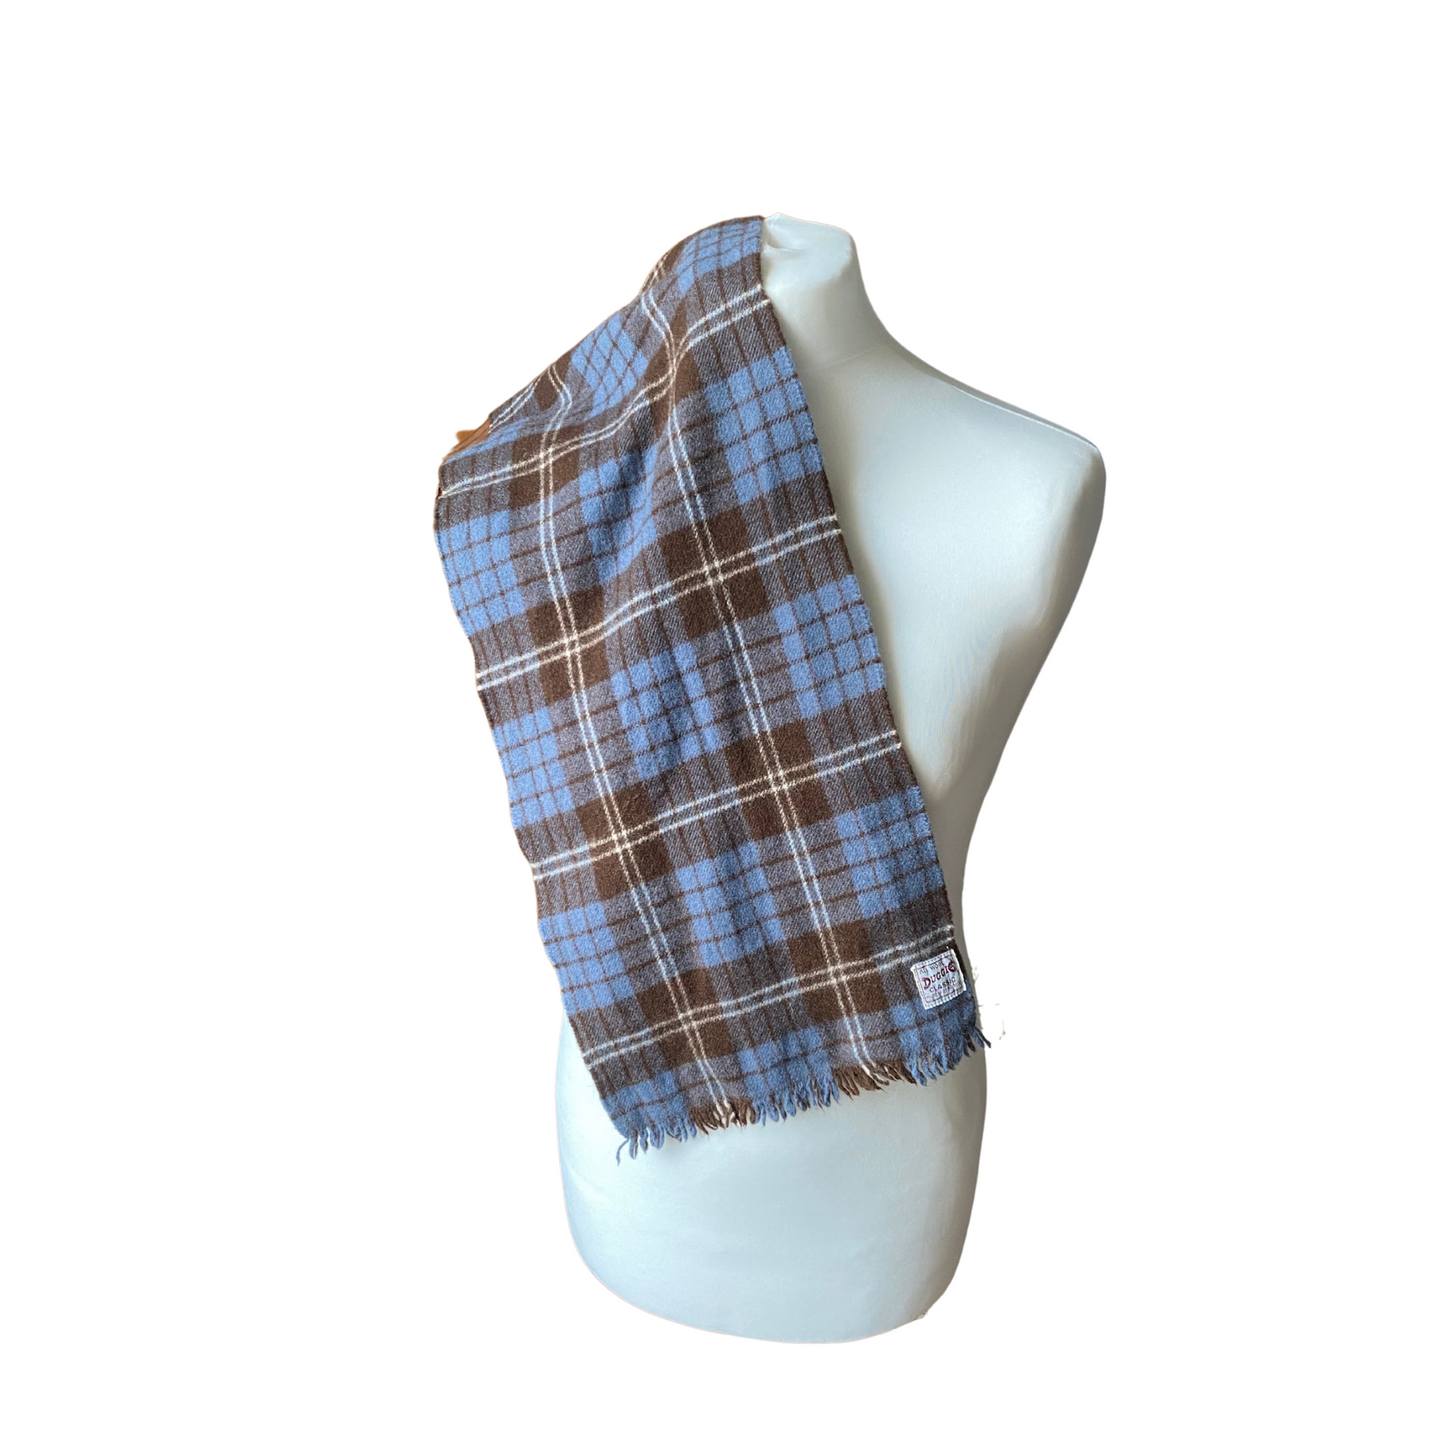 Capture the essence of 60s fashion with this iconic blue, brown, and white tartan vintage wool scarf.